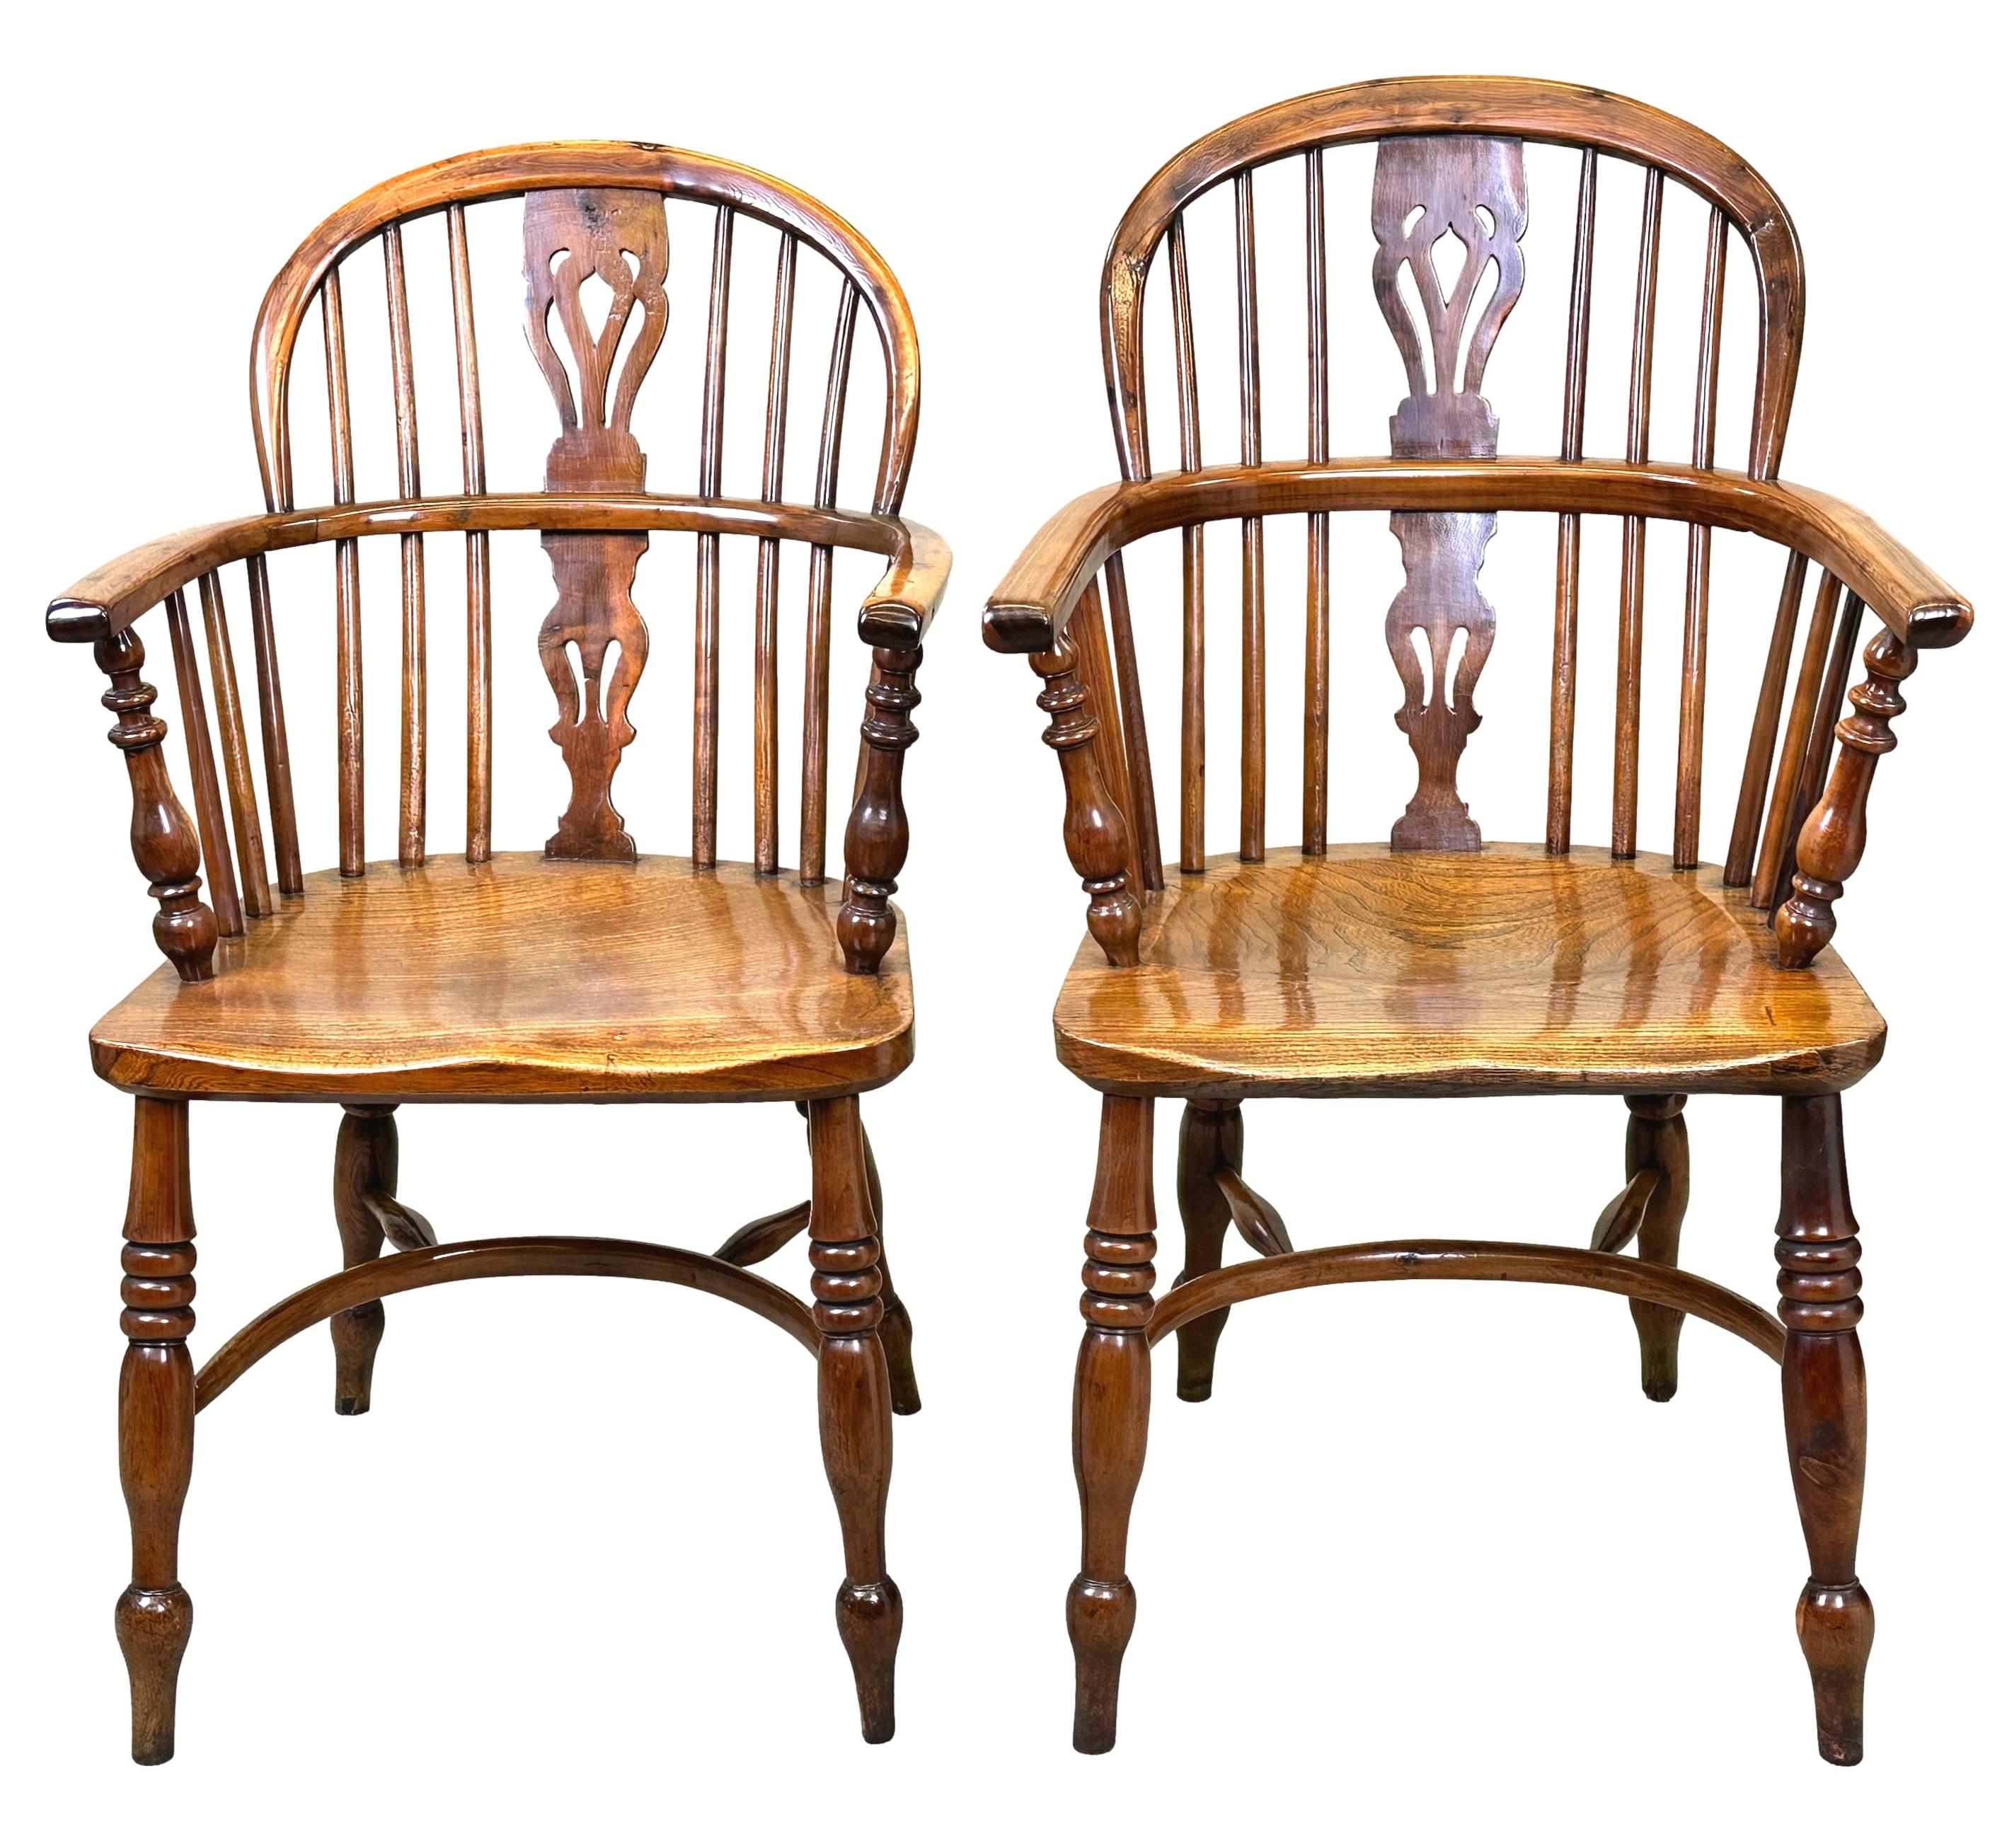 A Charming And Very Attractive Matched Set Of Six Yew Wood, Low Back, Kitchen Windsor Dining Armchairs, Having Extremely Well Figured Pierced Splats And Turned Supports To Curved Backs, Over Shaped Seats Raised On Elegant Turned Legs United By